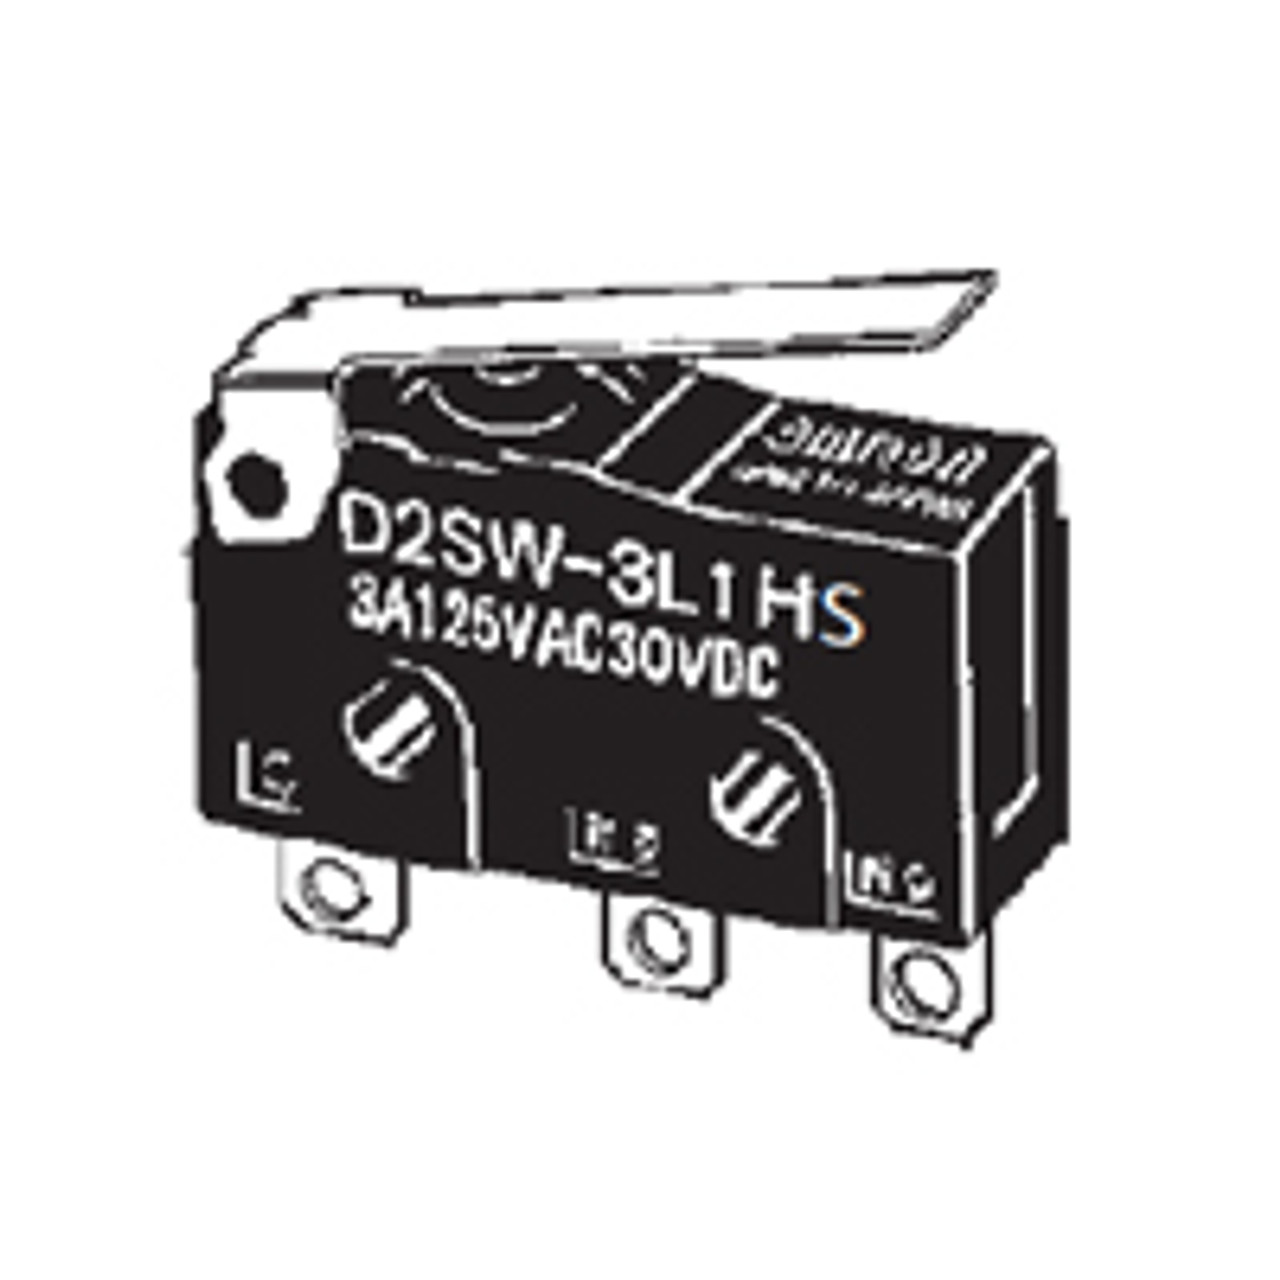 Omron D2SW-01L1MS Snap-Action Switches